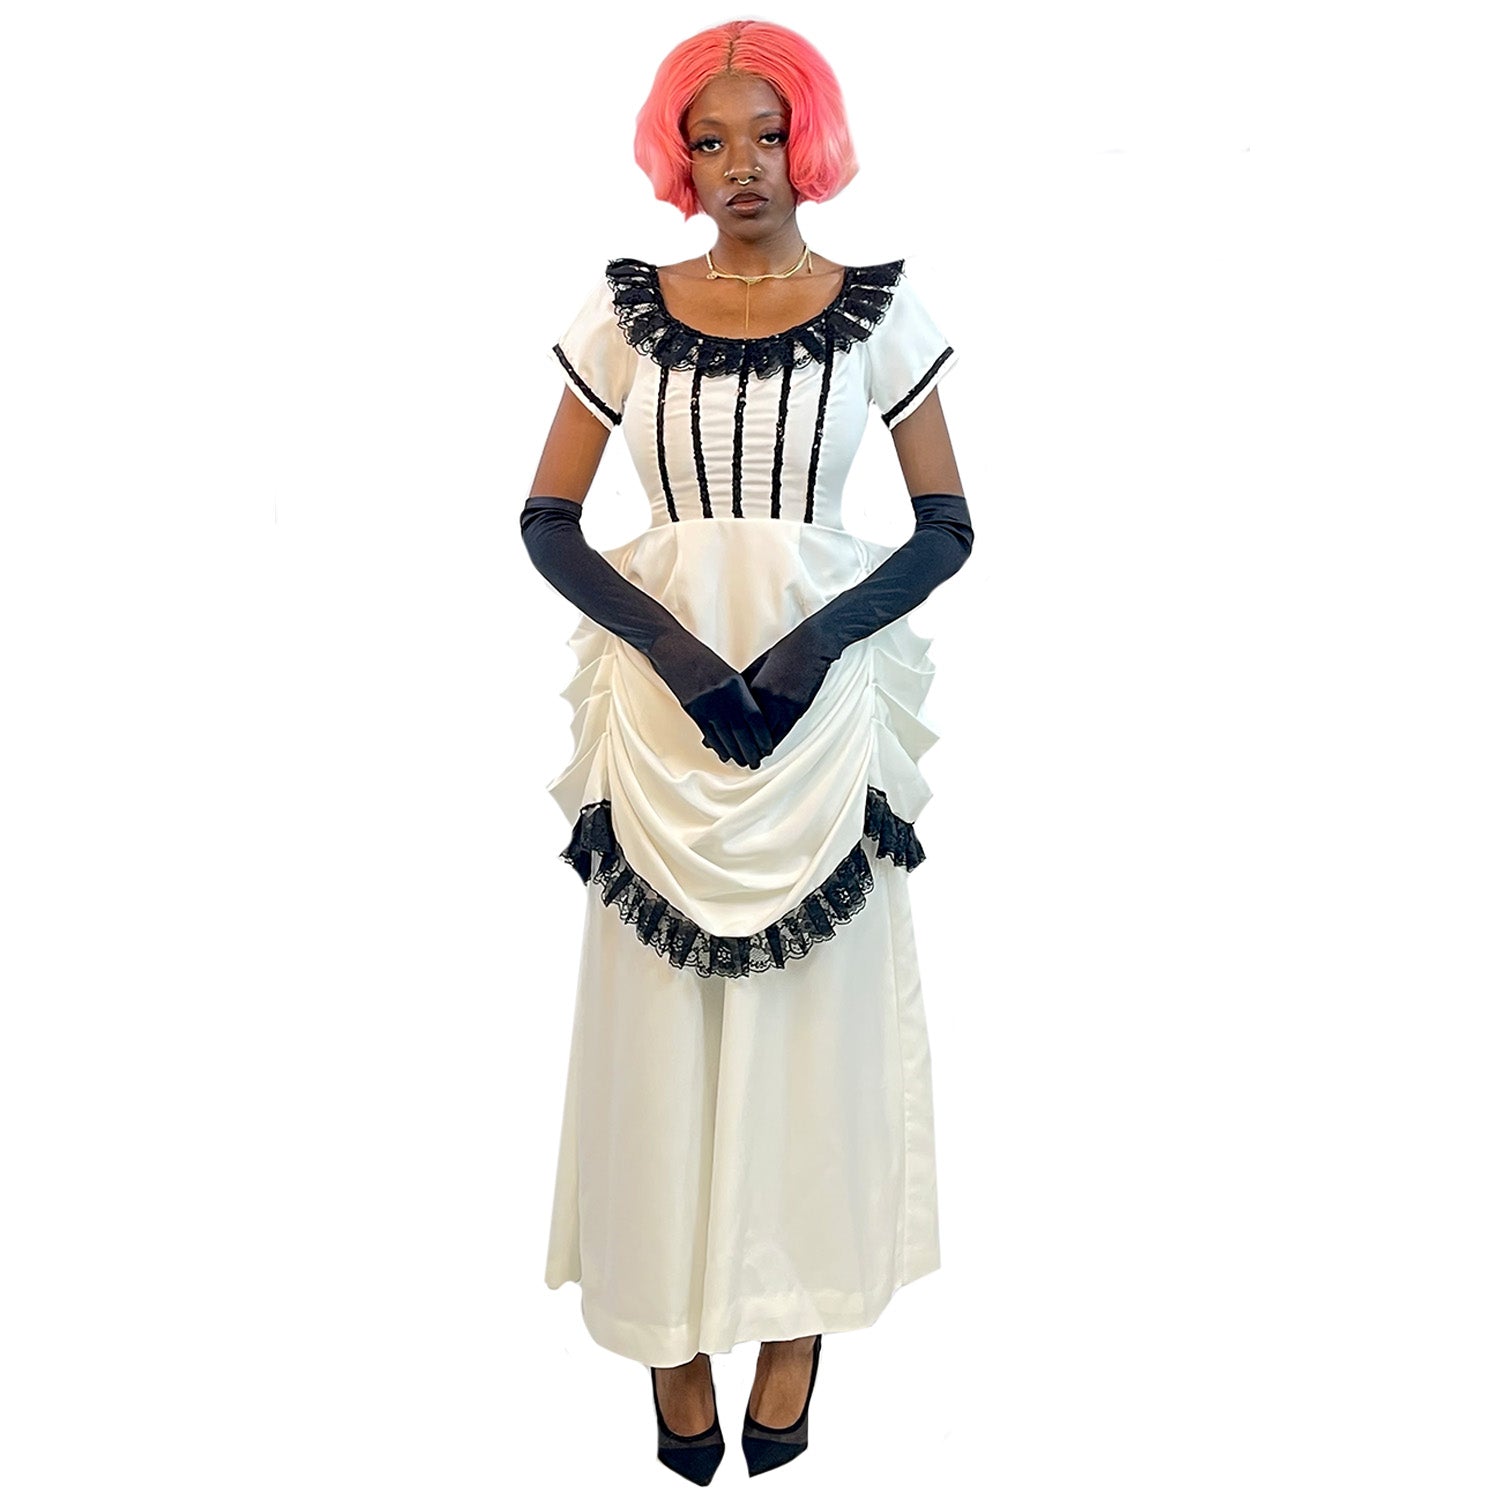 Women's Pirate Blouses, Shirts and Tops  Deluxe Theatrical Quality Adult  Costumes